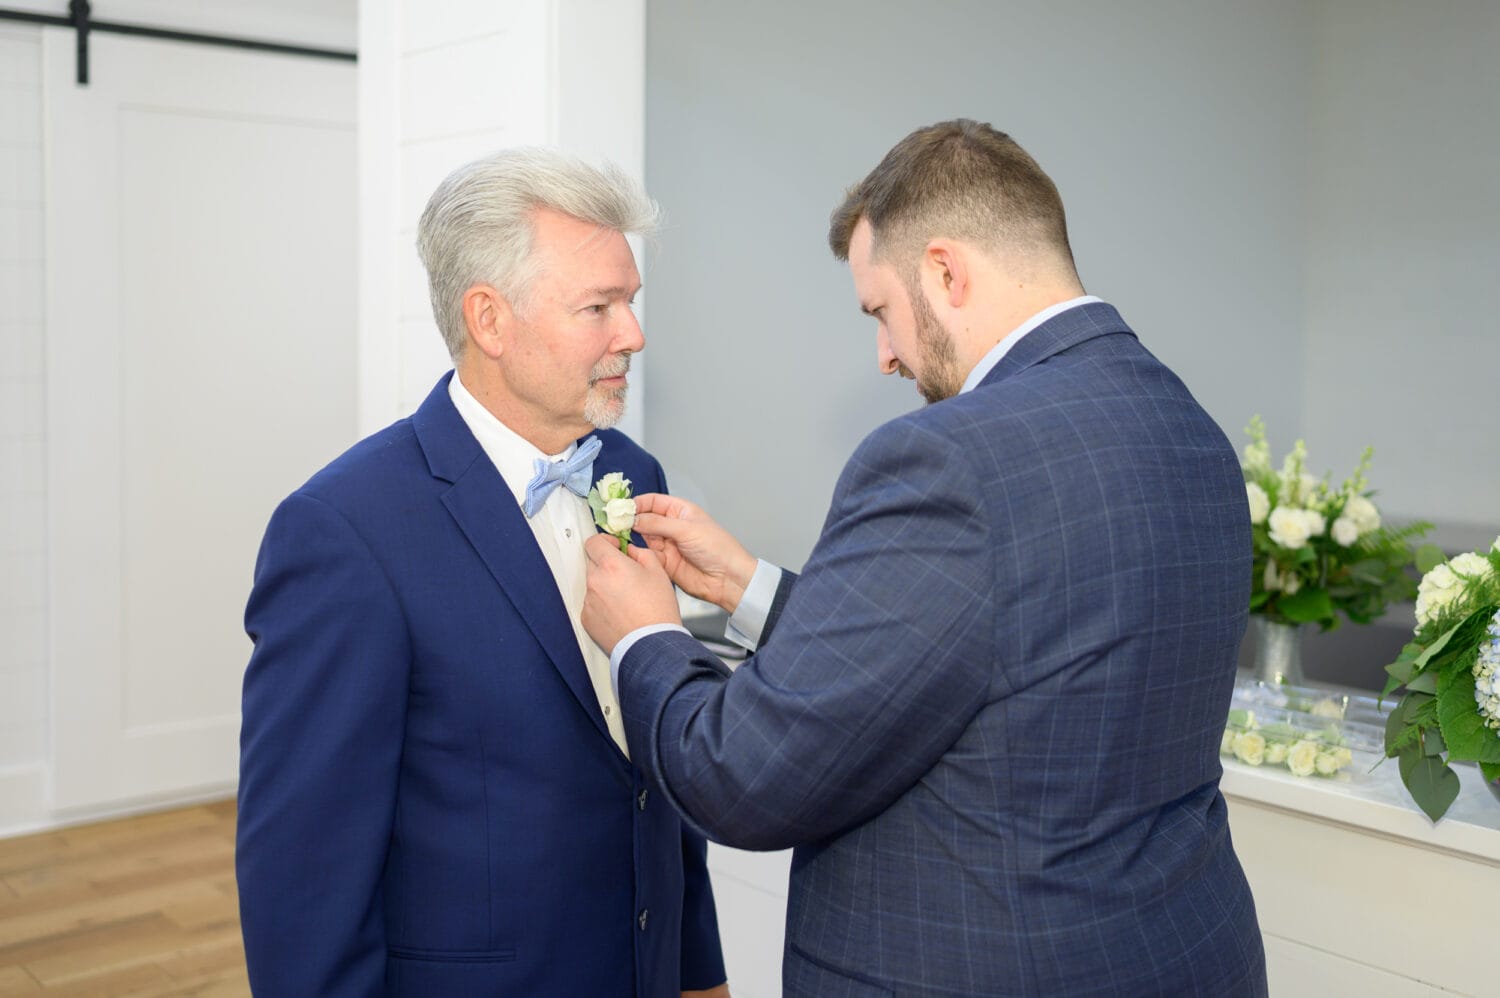 Groom helping father with boutonniere  - The Venue at White Oaks Farm